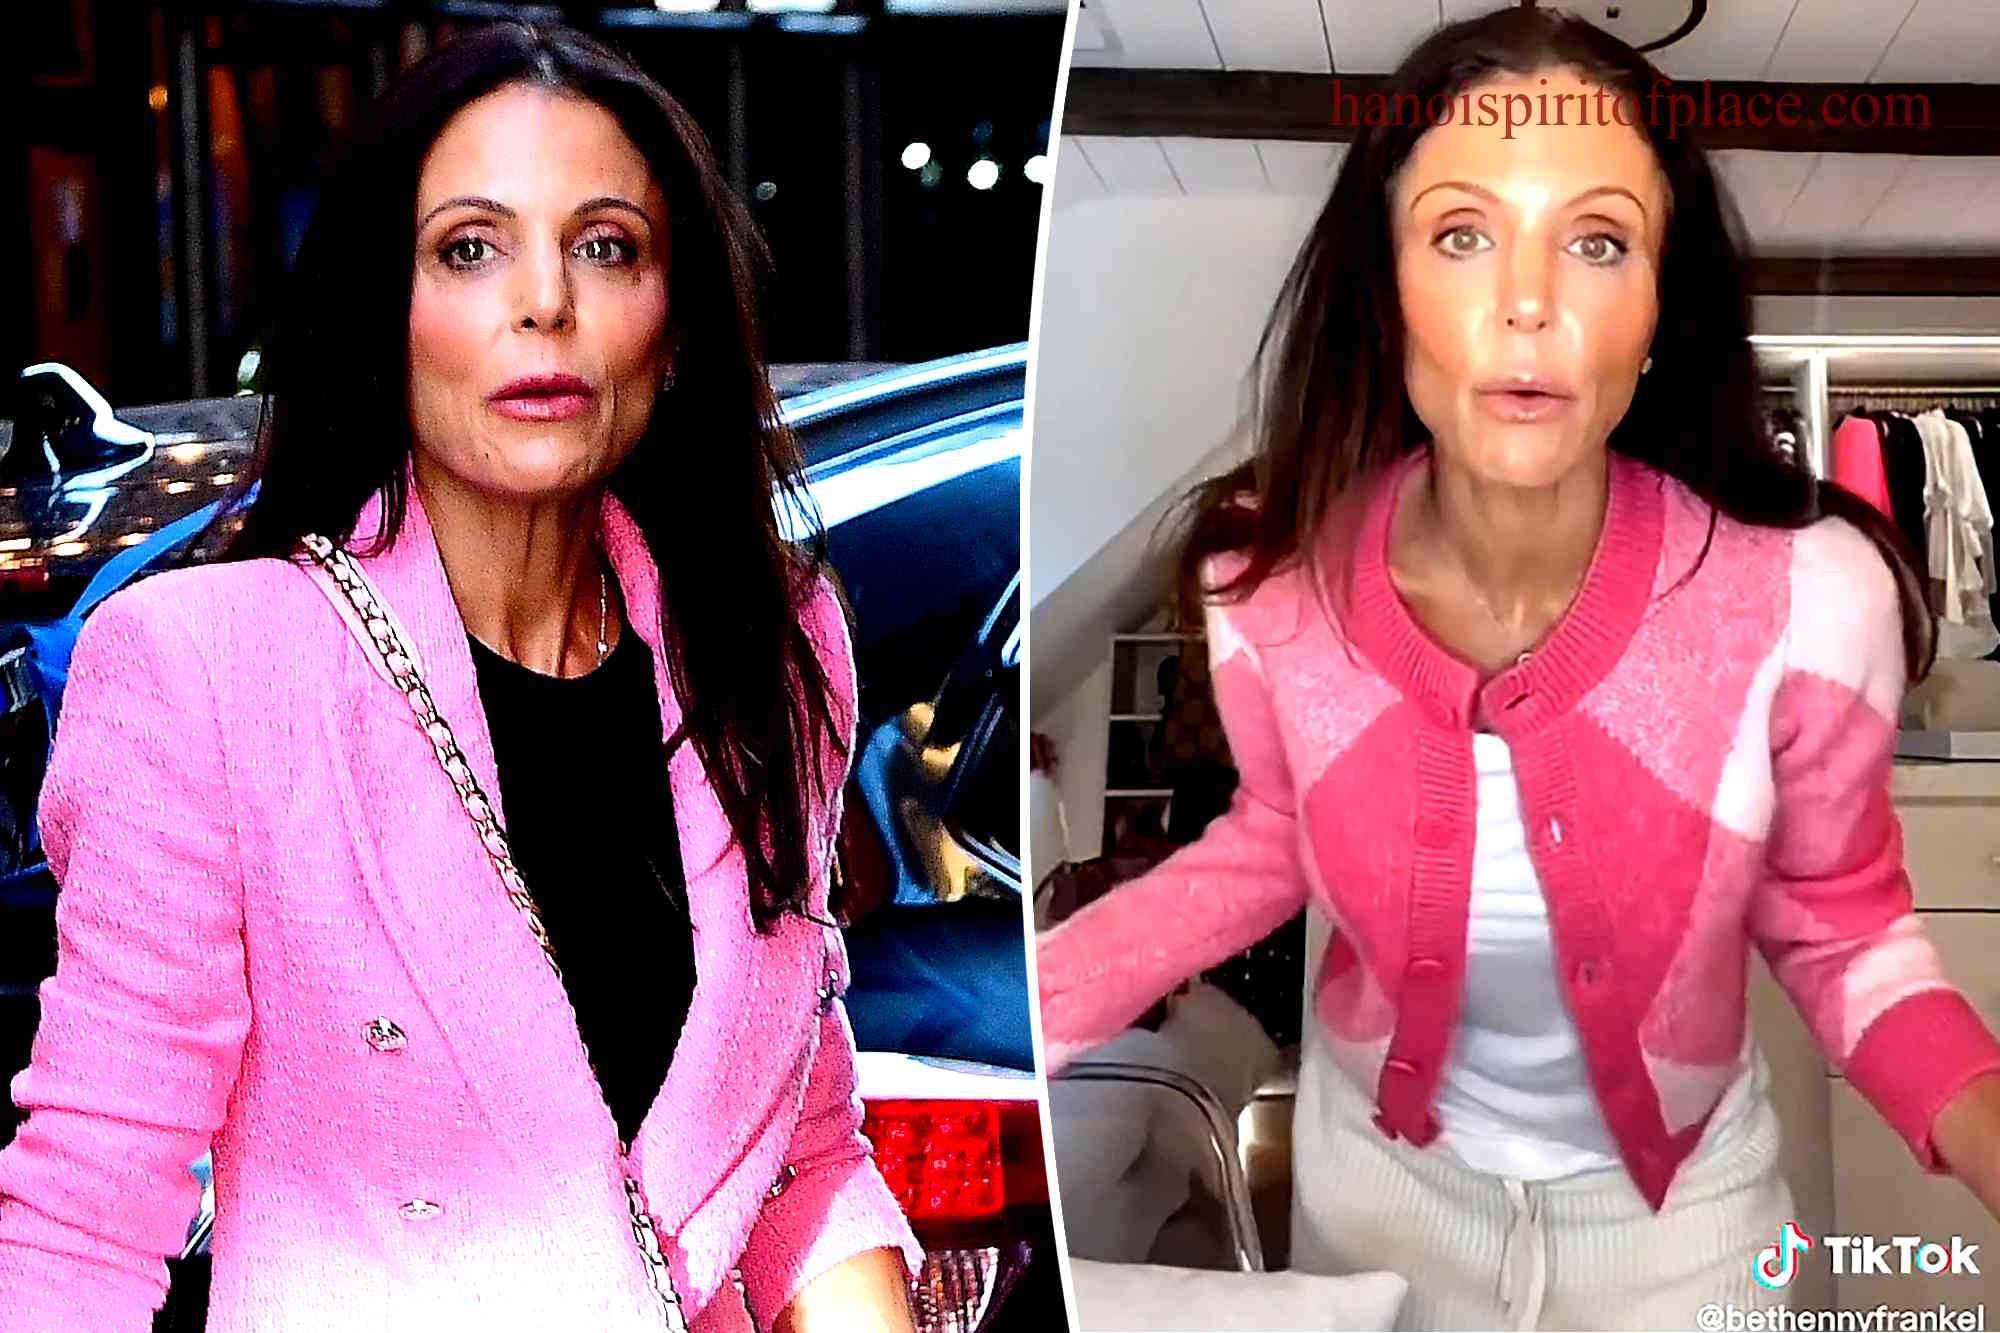 Top TikTok Tips and Tricks from Bethenny